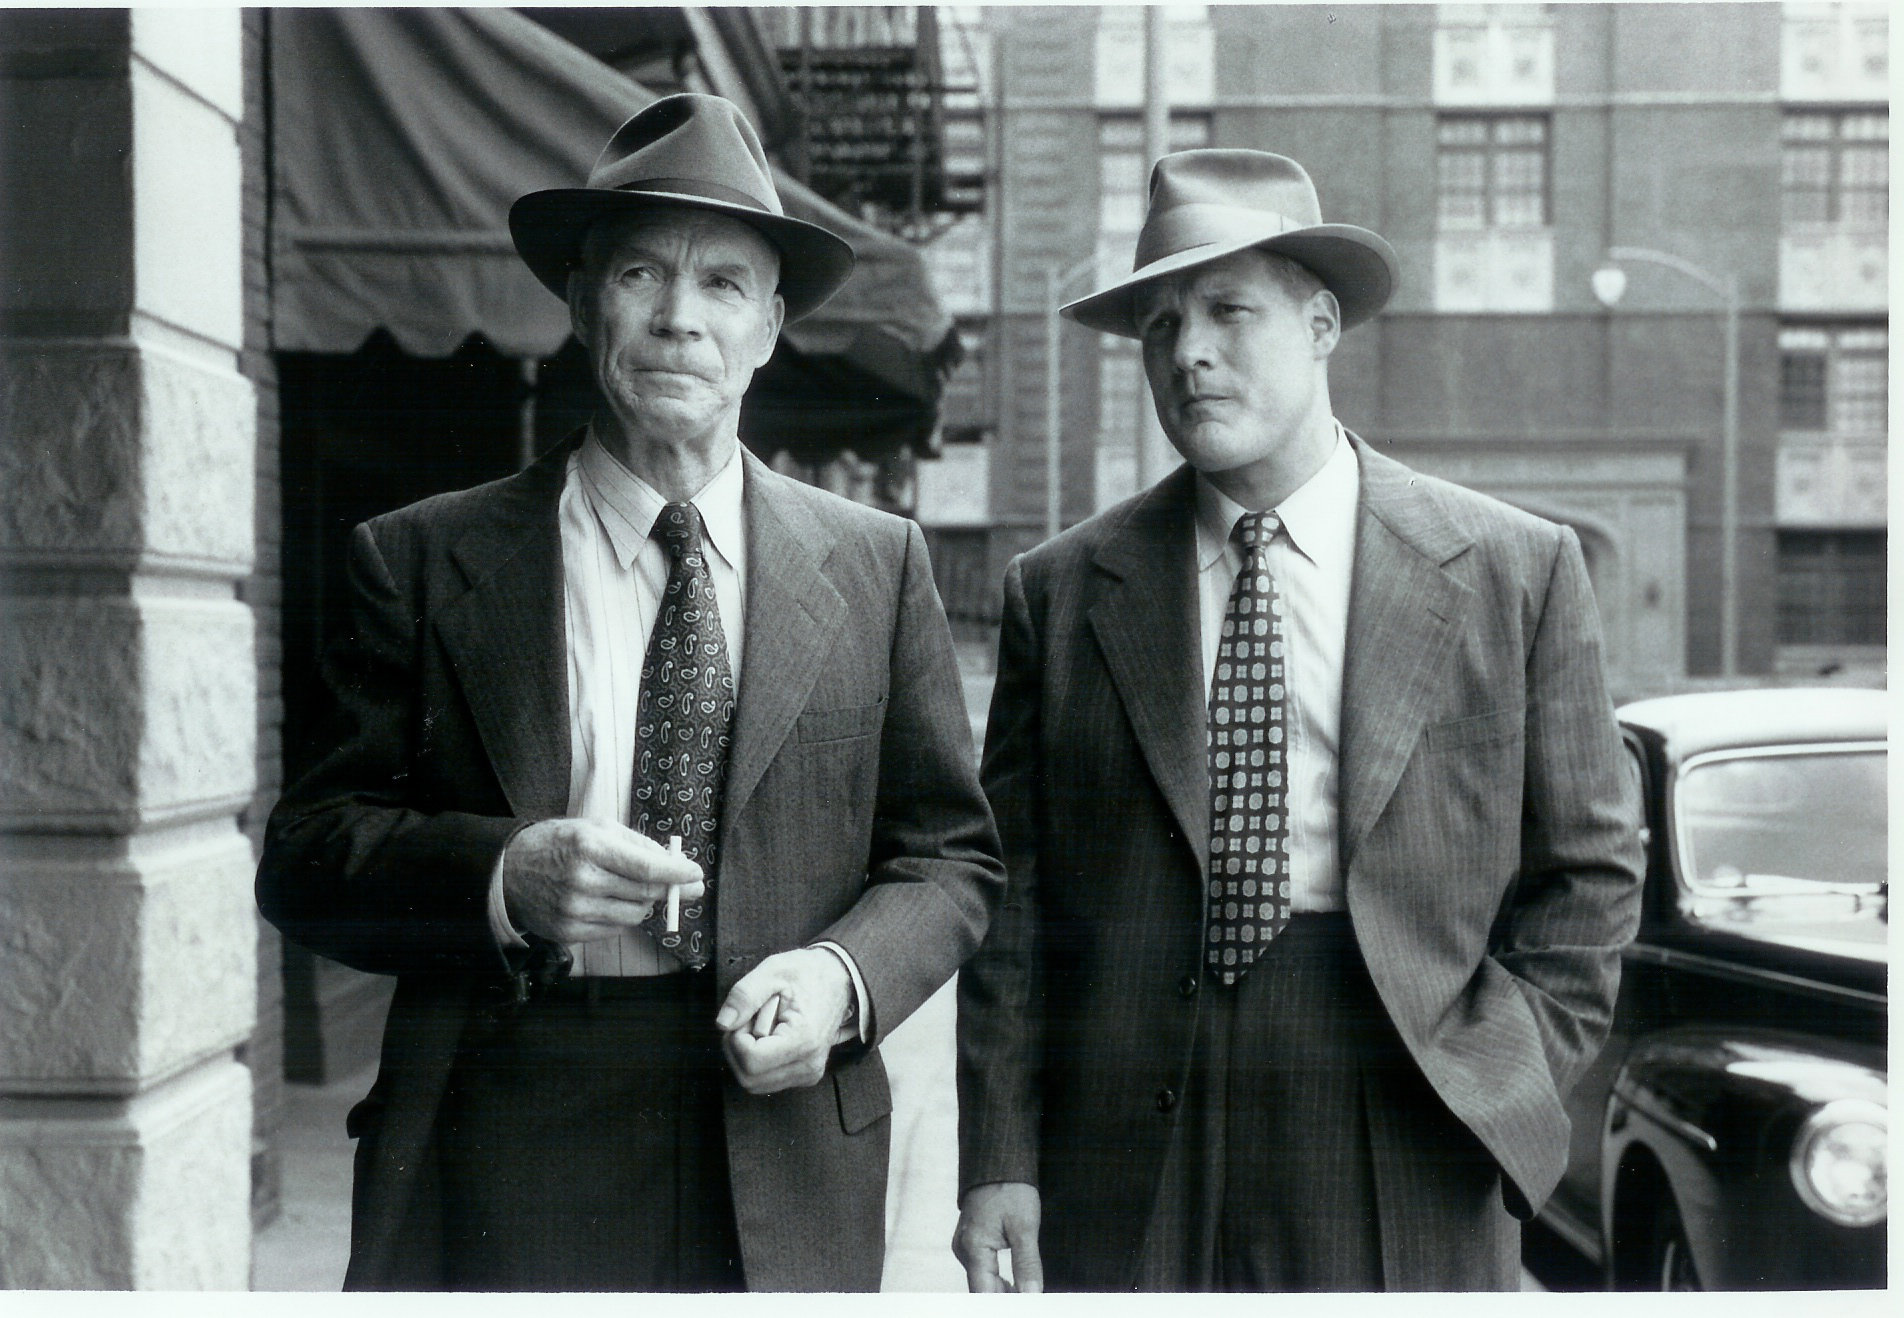 Christopher Kriesa (left) as Persky and Brian Haley (right) as Krebs in The Man Who Wasn't There